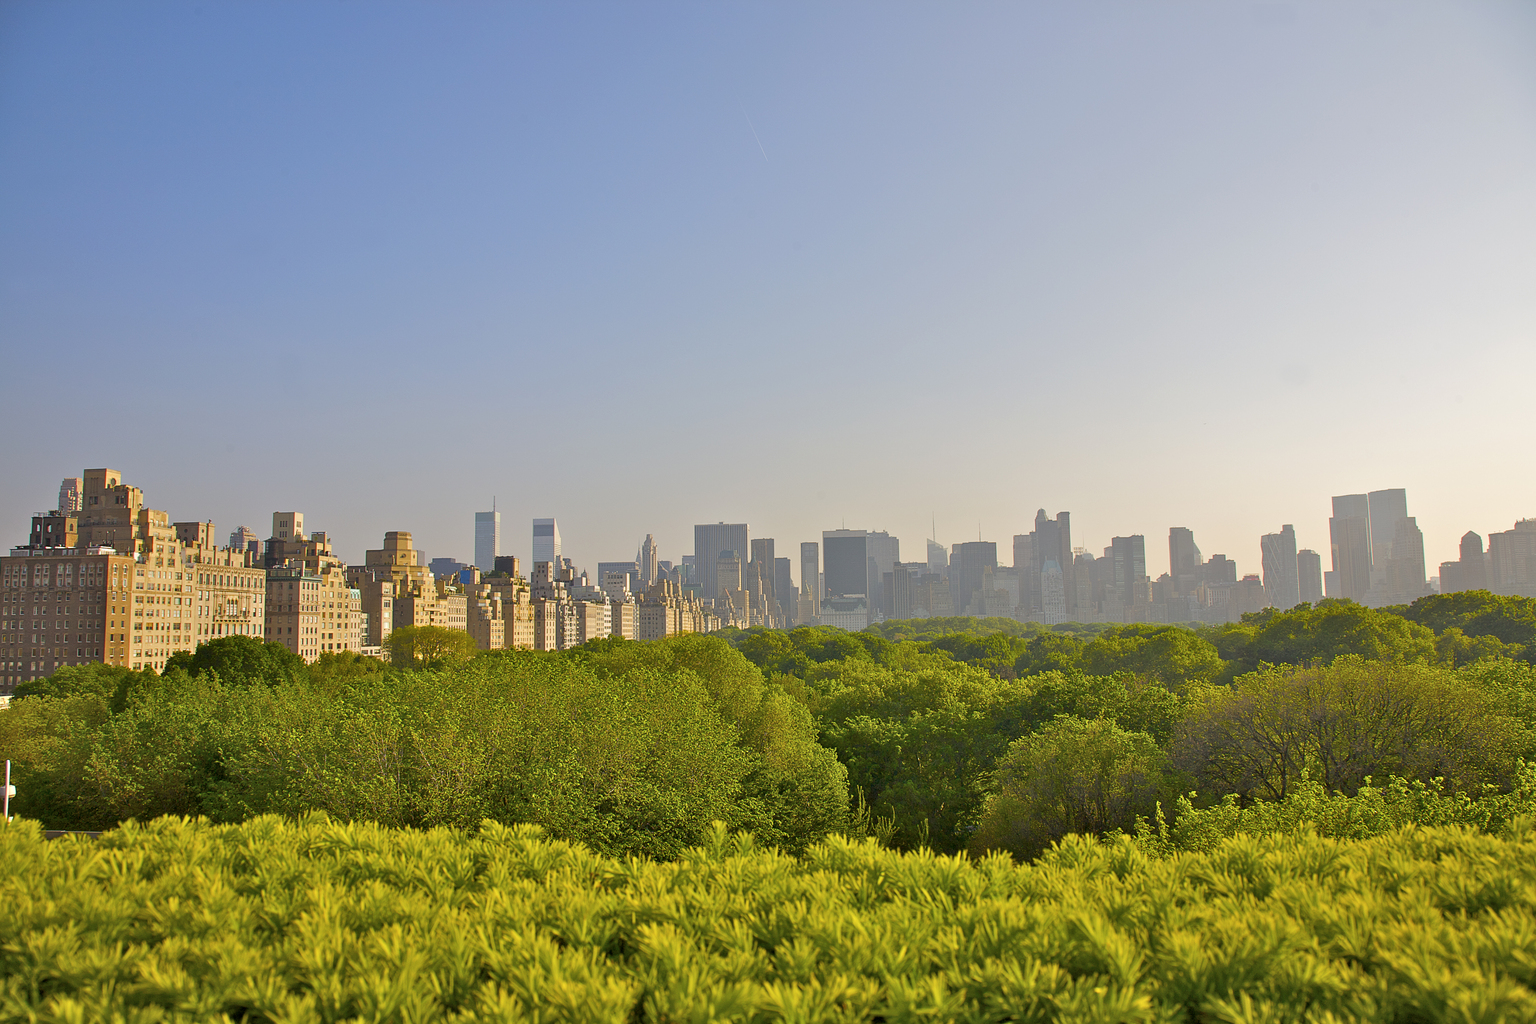 View of Manhattan's Central Park as well as the East Side and Central Park South in late afternoon, New York City,